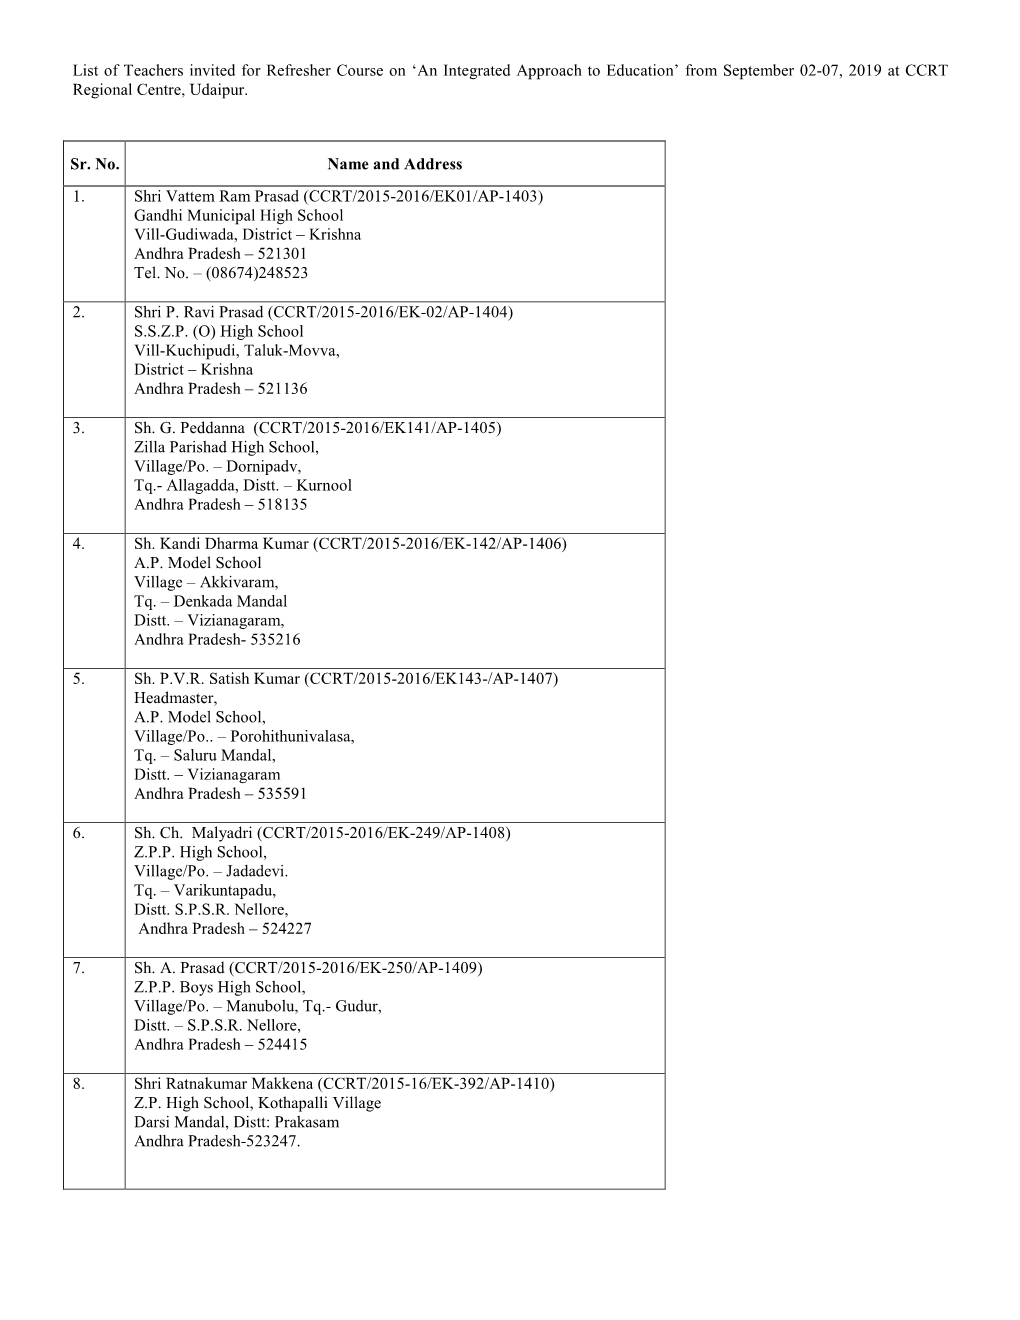 List of Teachers Invited for Refresher Course on 'An Integrated Approach to Education'